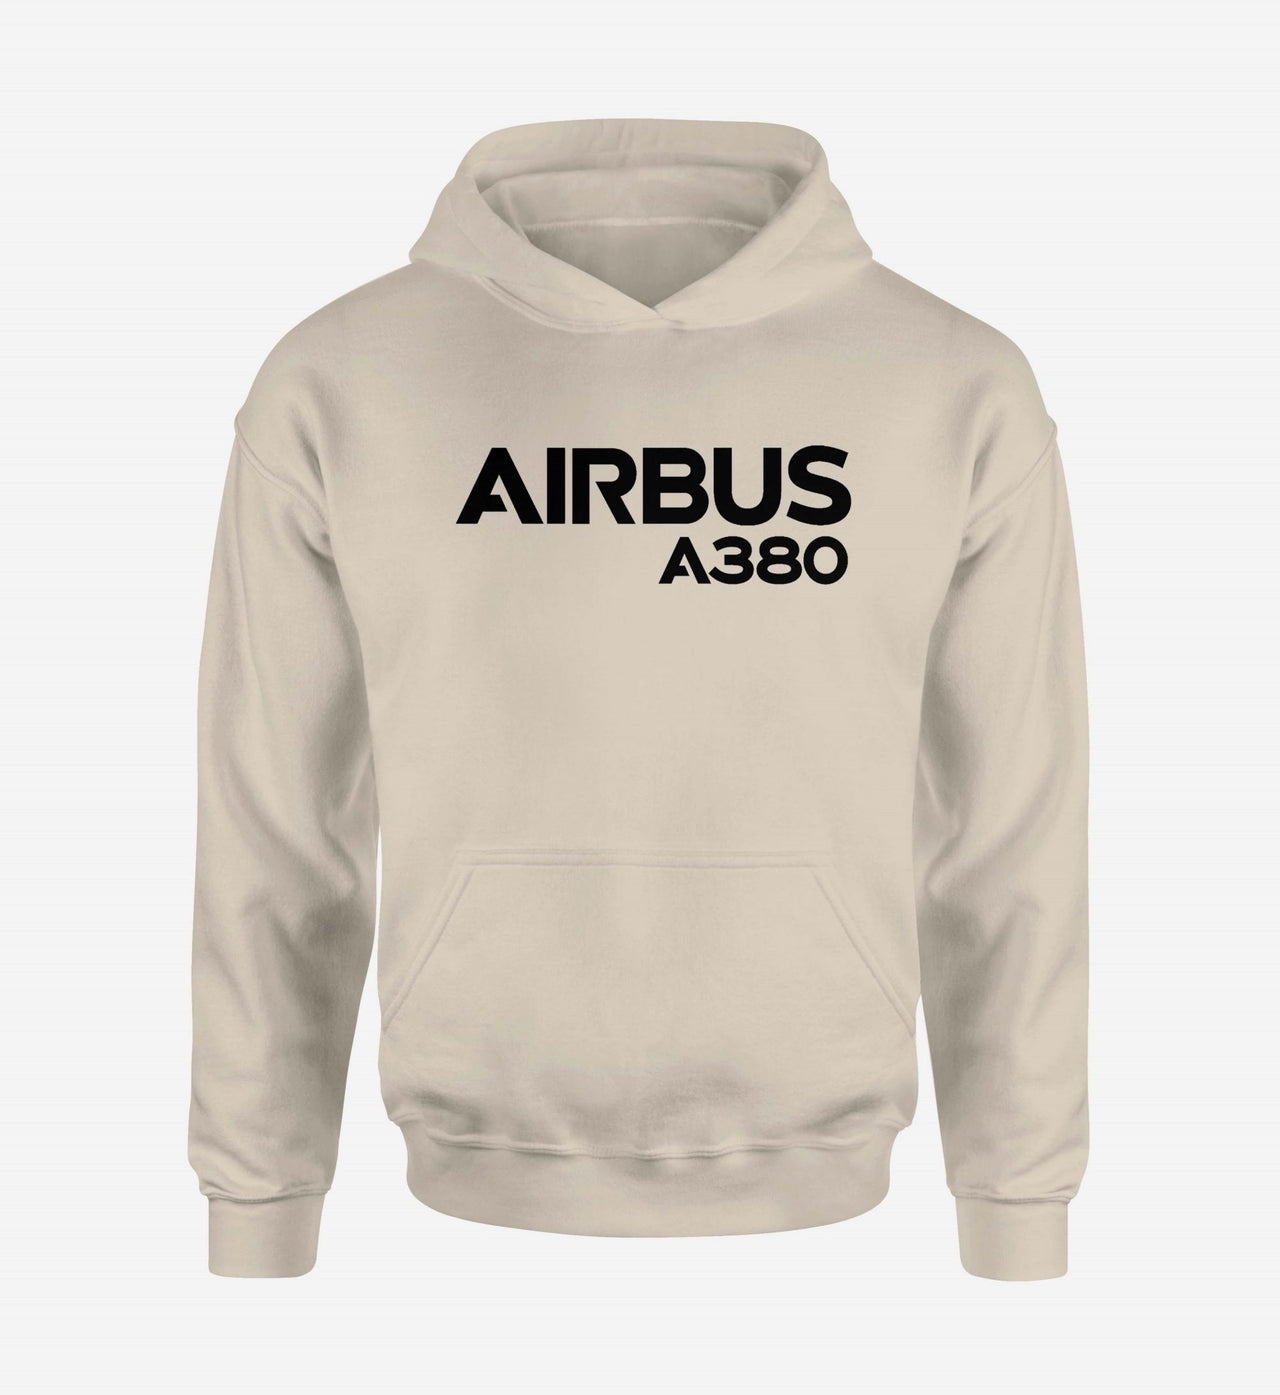 Airbus A380 & Text Designed Hoodies